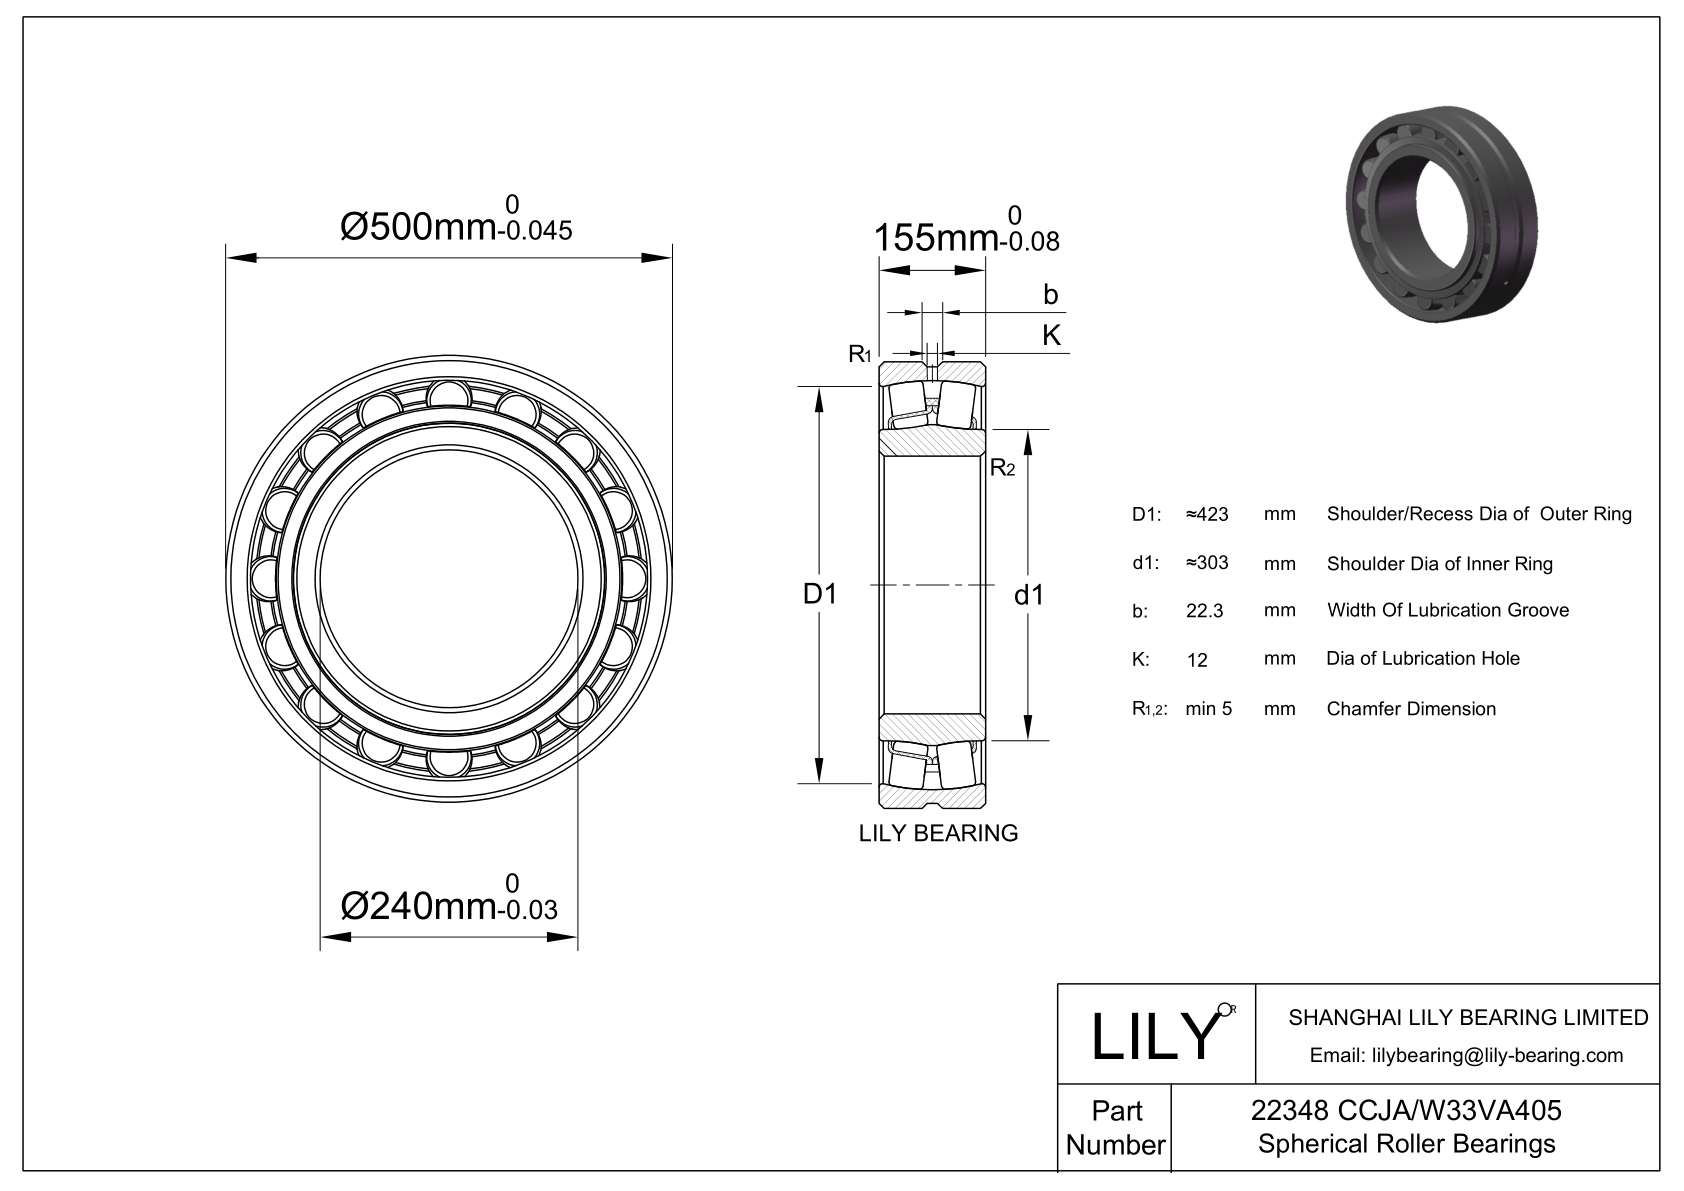 22348 CCJA/W33VA405 Double Row Spherical Roller Bearing cad drawing